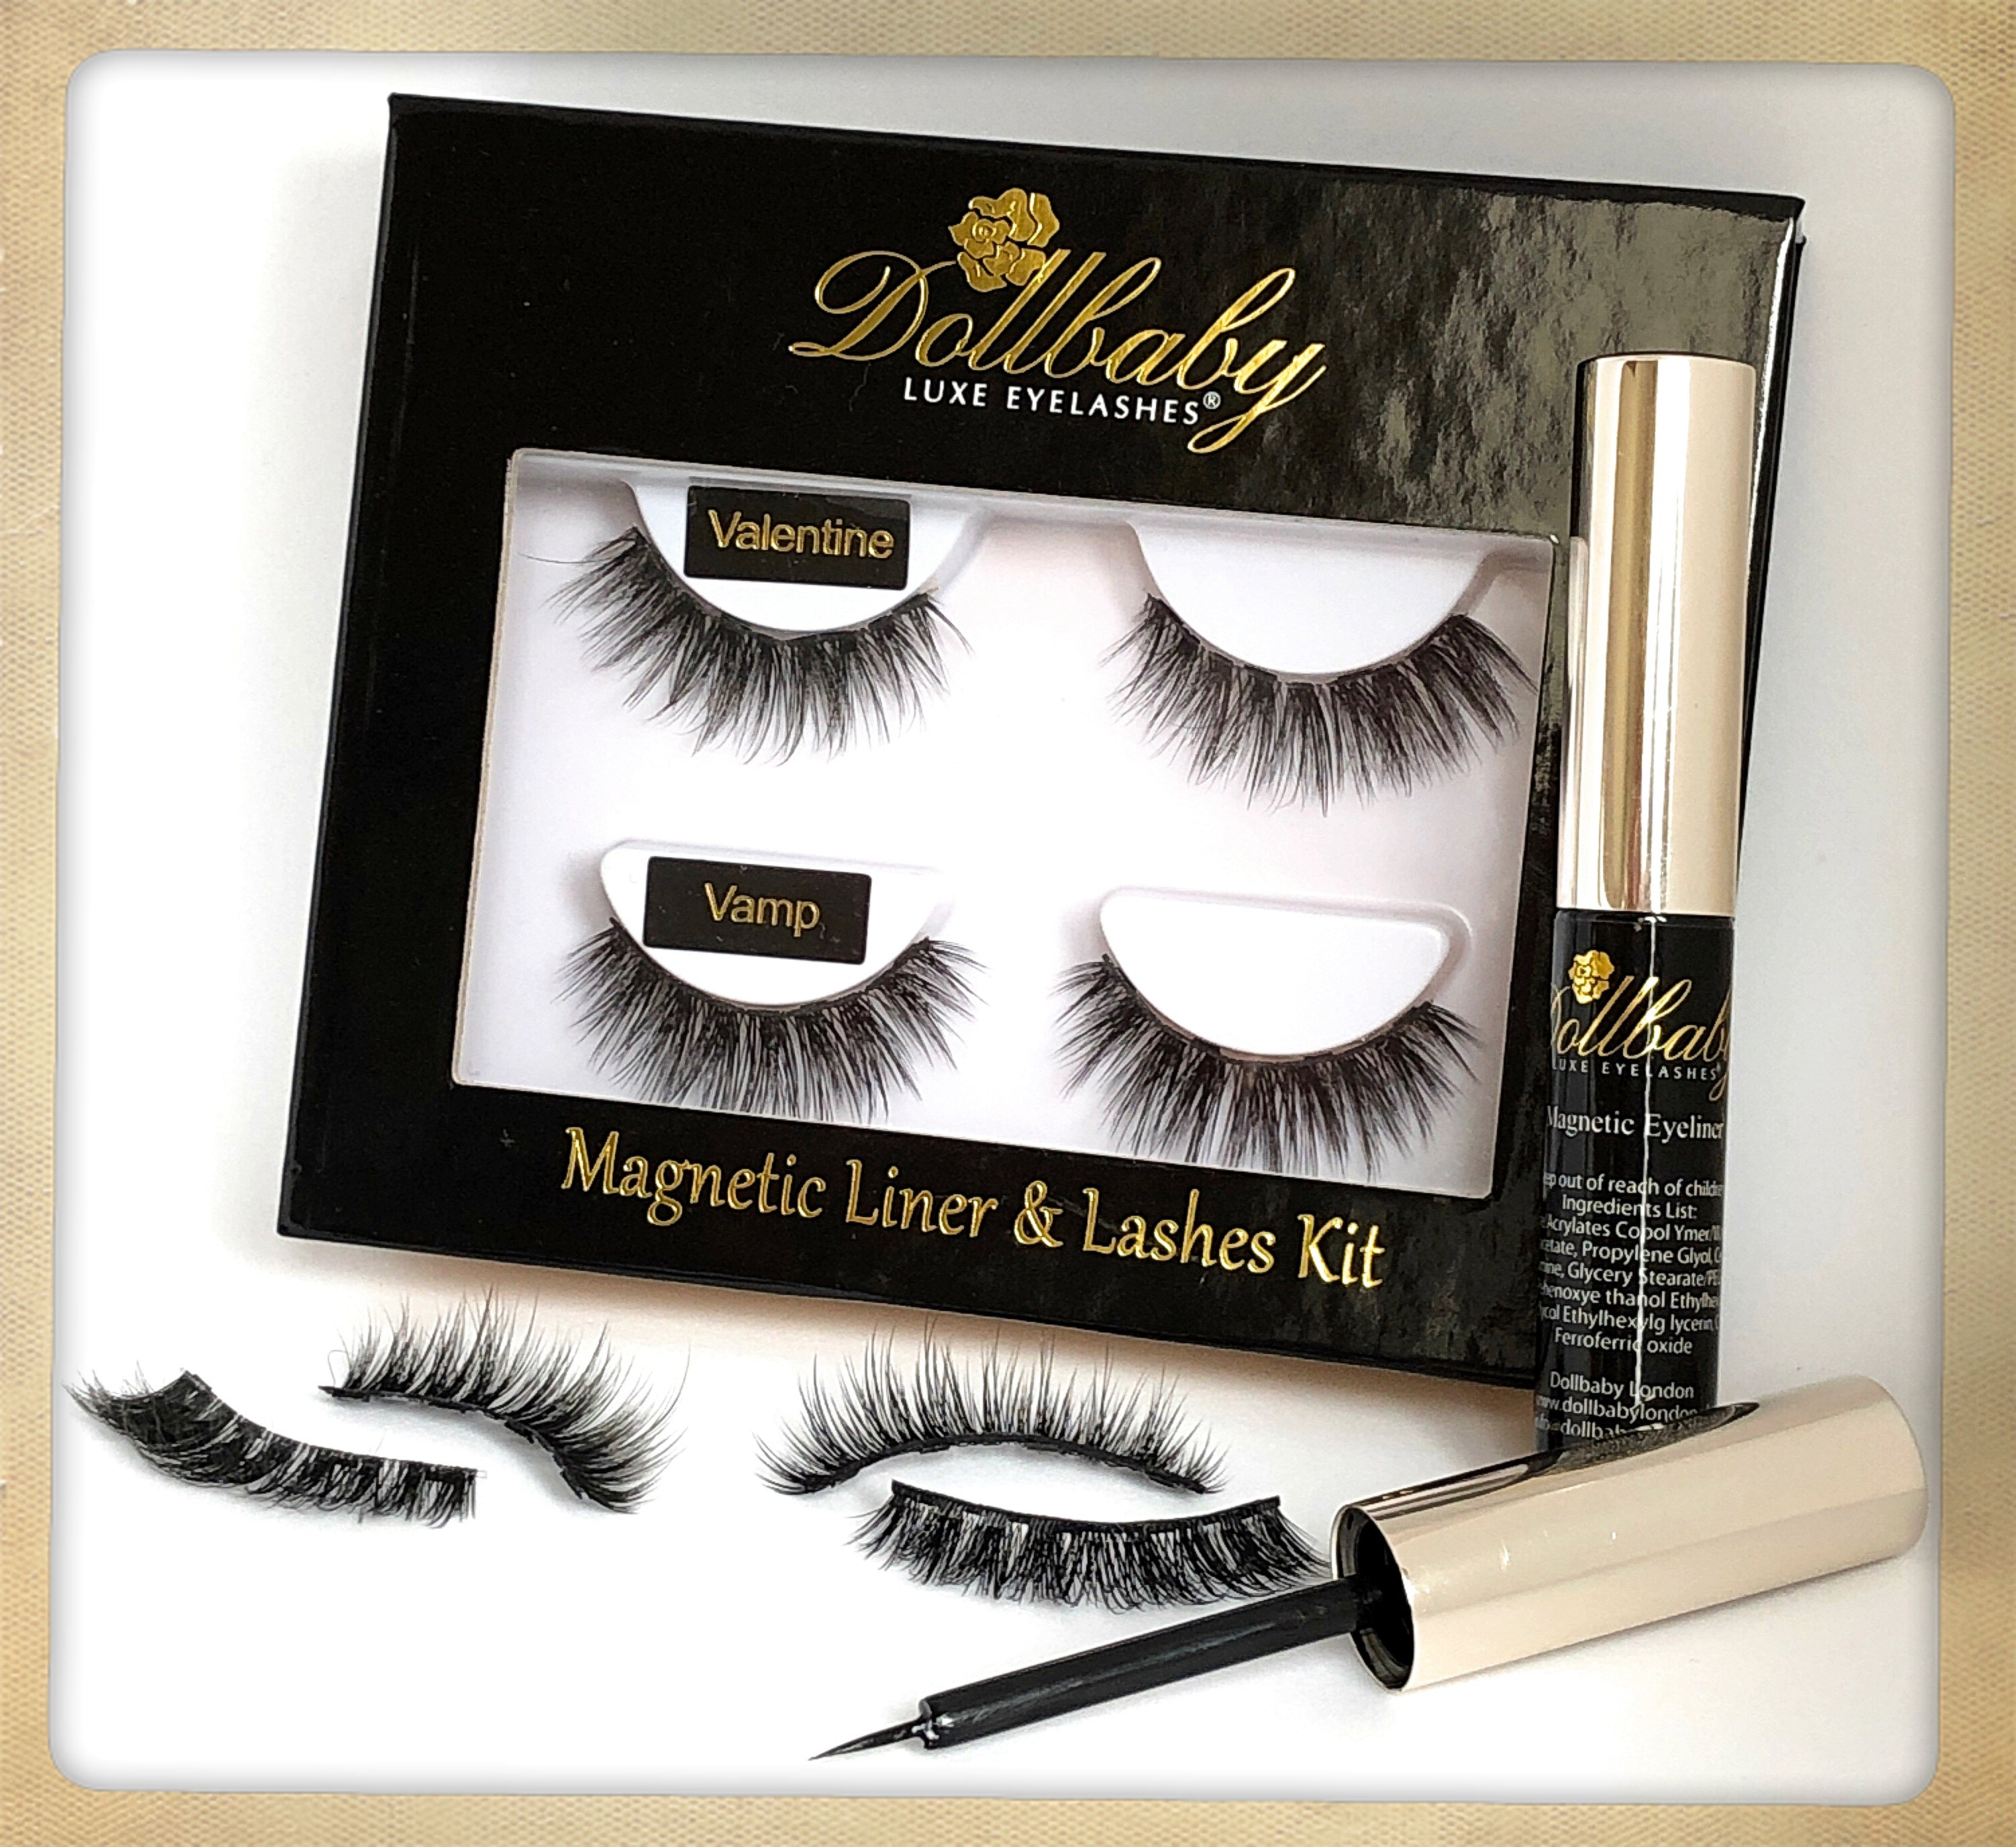 No Glue Lashes! Magnetic Eyeliner & Lashes Kit As Seen on ITV This Morning & Cosmopolitan